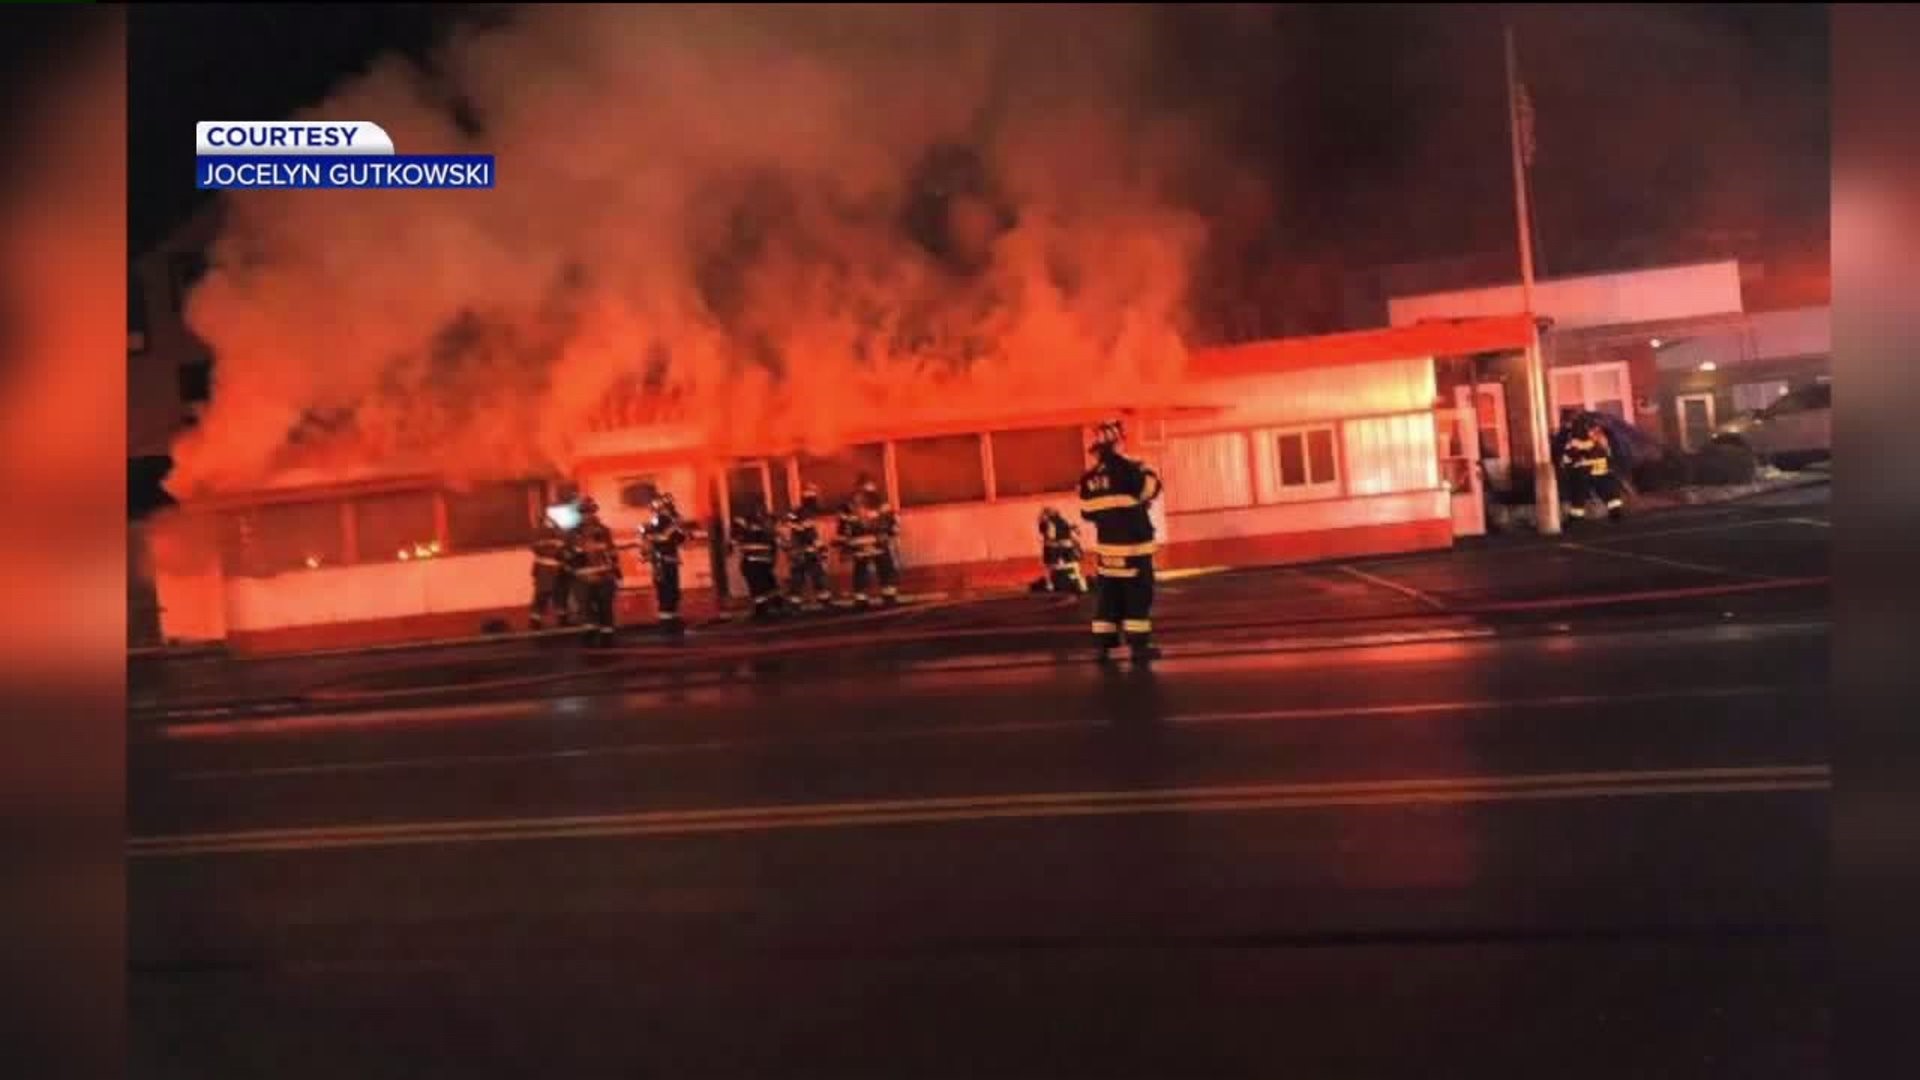 Fire Guts Diner in Luzerne County